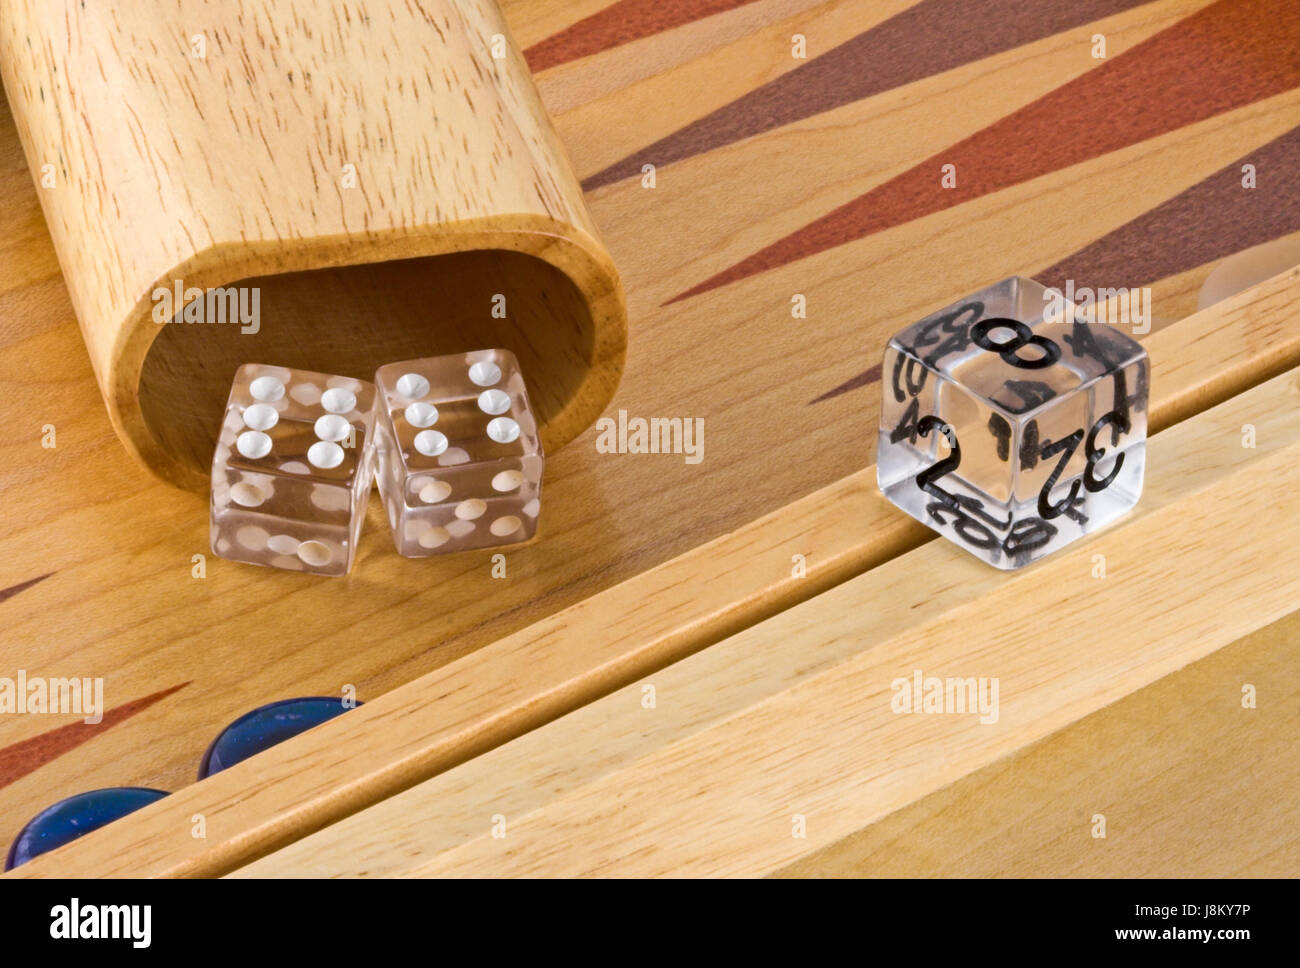 board, game, tournament, play, playing, plays, played, die, dice, games, Stock Photo